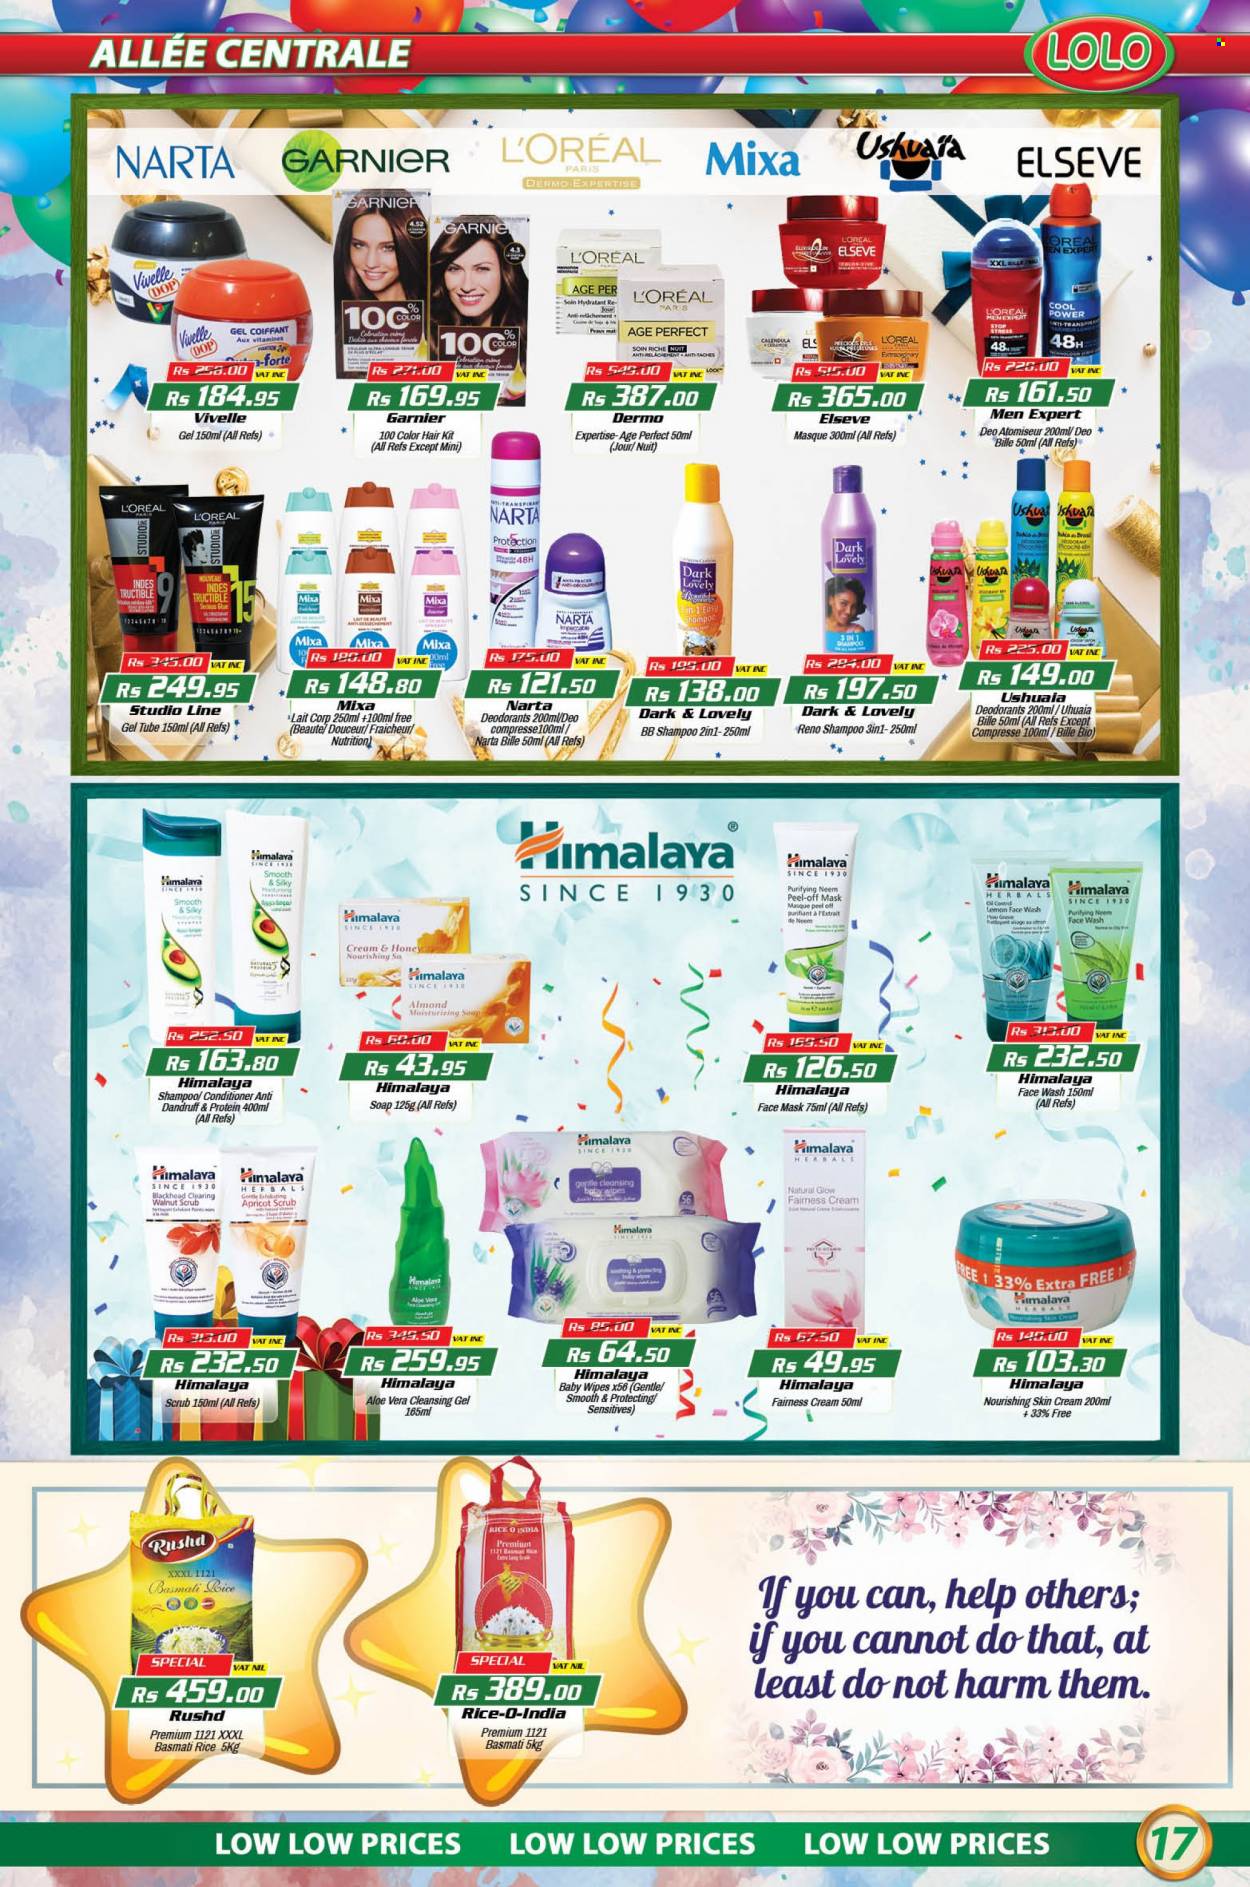 thumbnail - LOLO Hyper Catalogue - 26.07.2022 - 16.08.2022 - Sales products - basmati rice, rice, oil, honey, L'Or, wipes, baby wipes, face gel, soap, L’Oréal, peel-off mask, face mask, L’Oréal Men, face wash, conditioner, anti-perspirant, pot, glue, Garnier, shampoo, deodorant. Page 17.